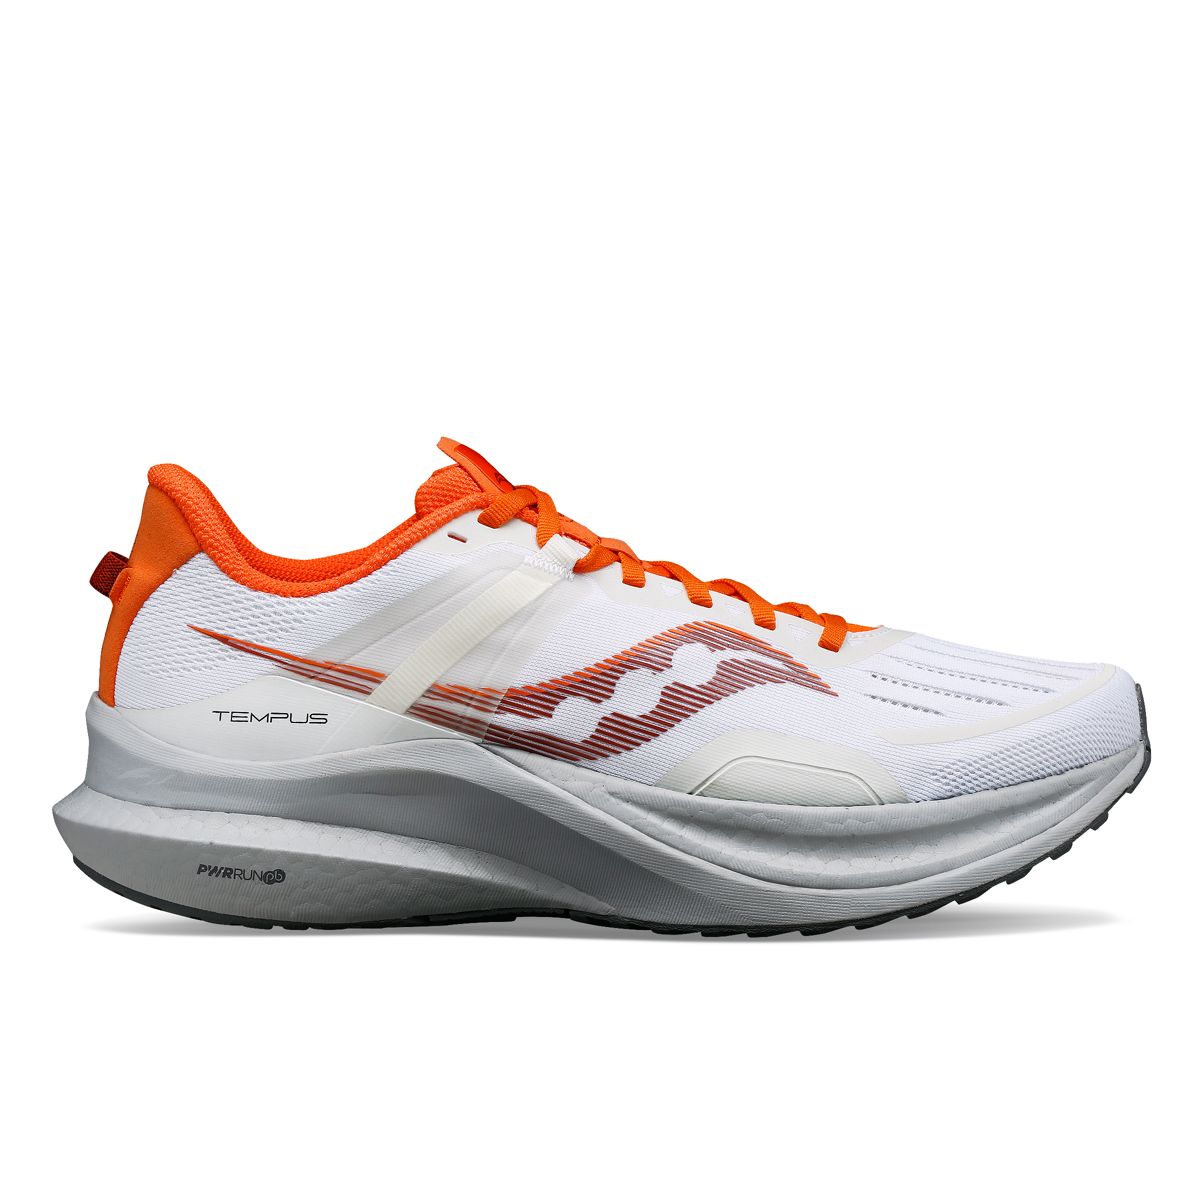 Men's Stability Running Shoes | Saucony